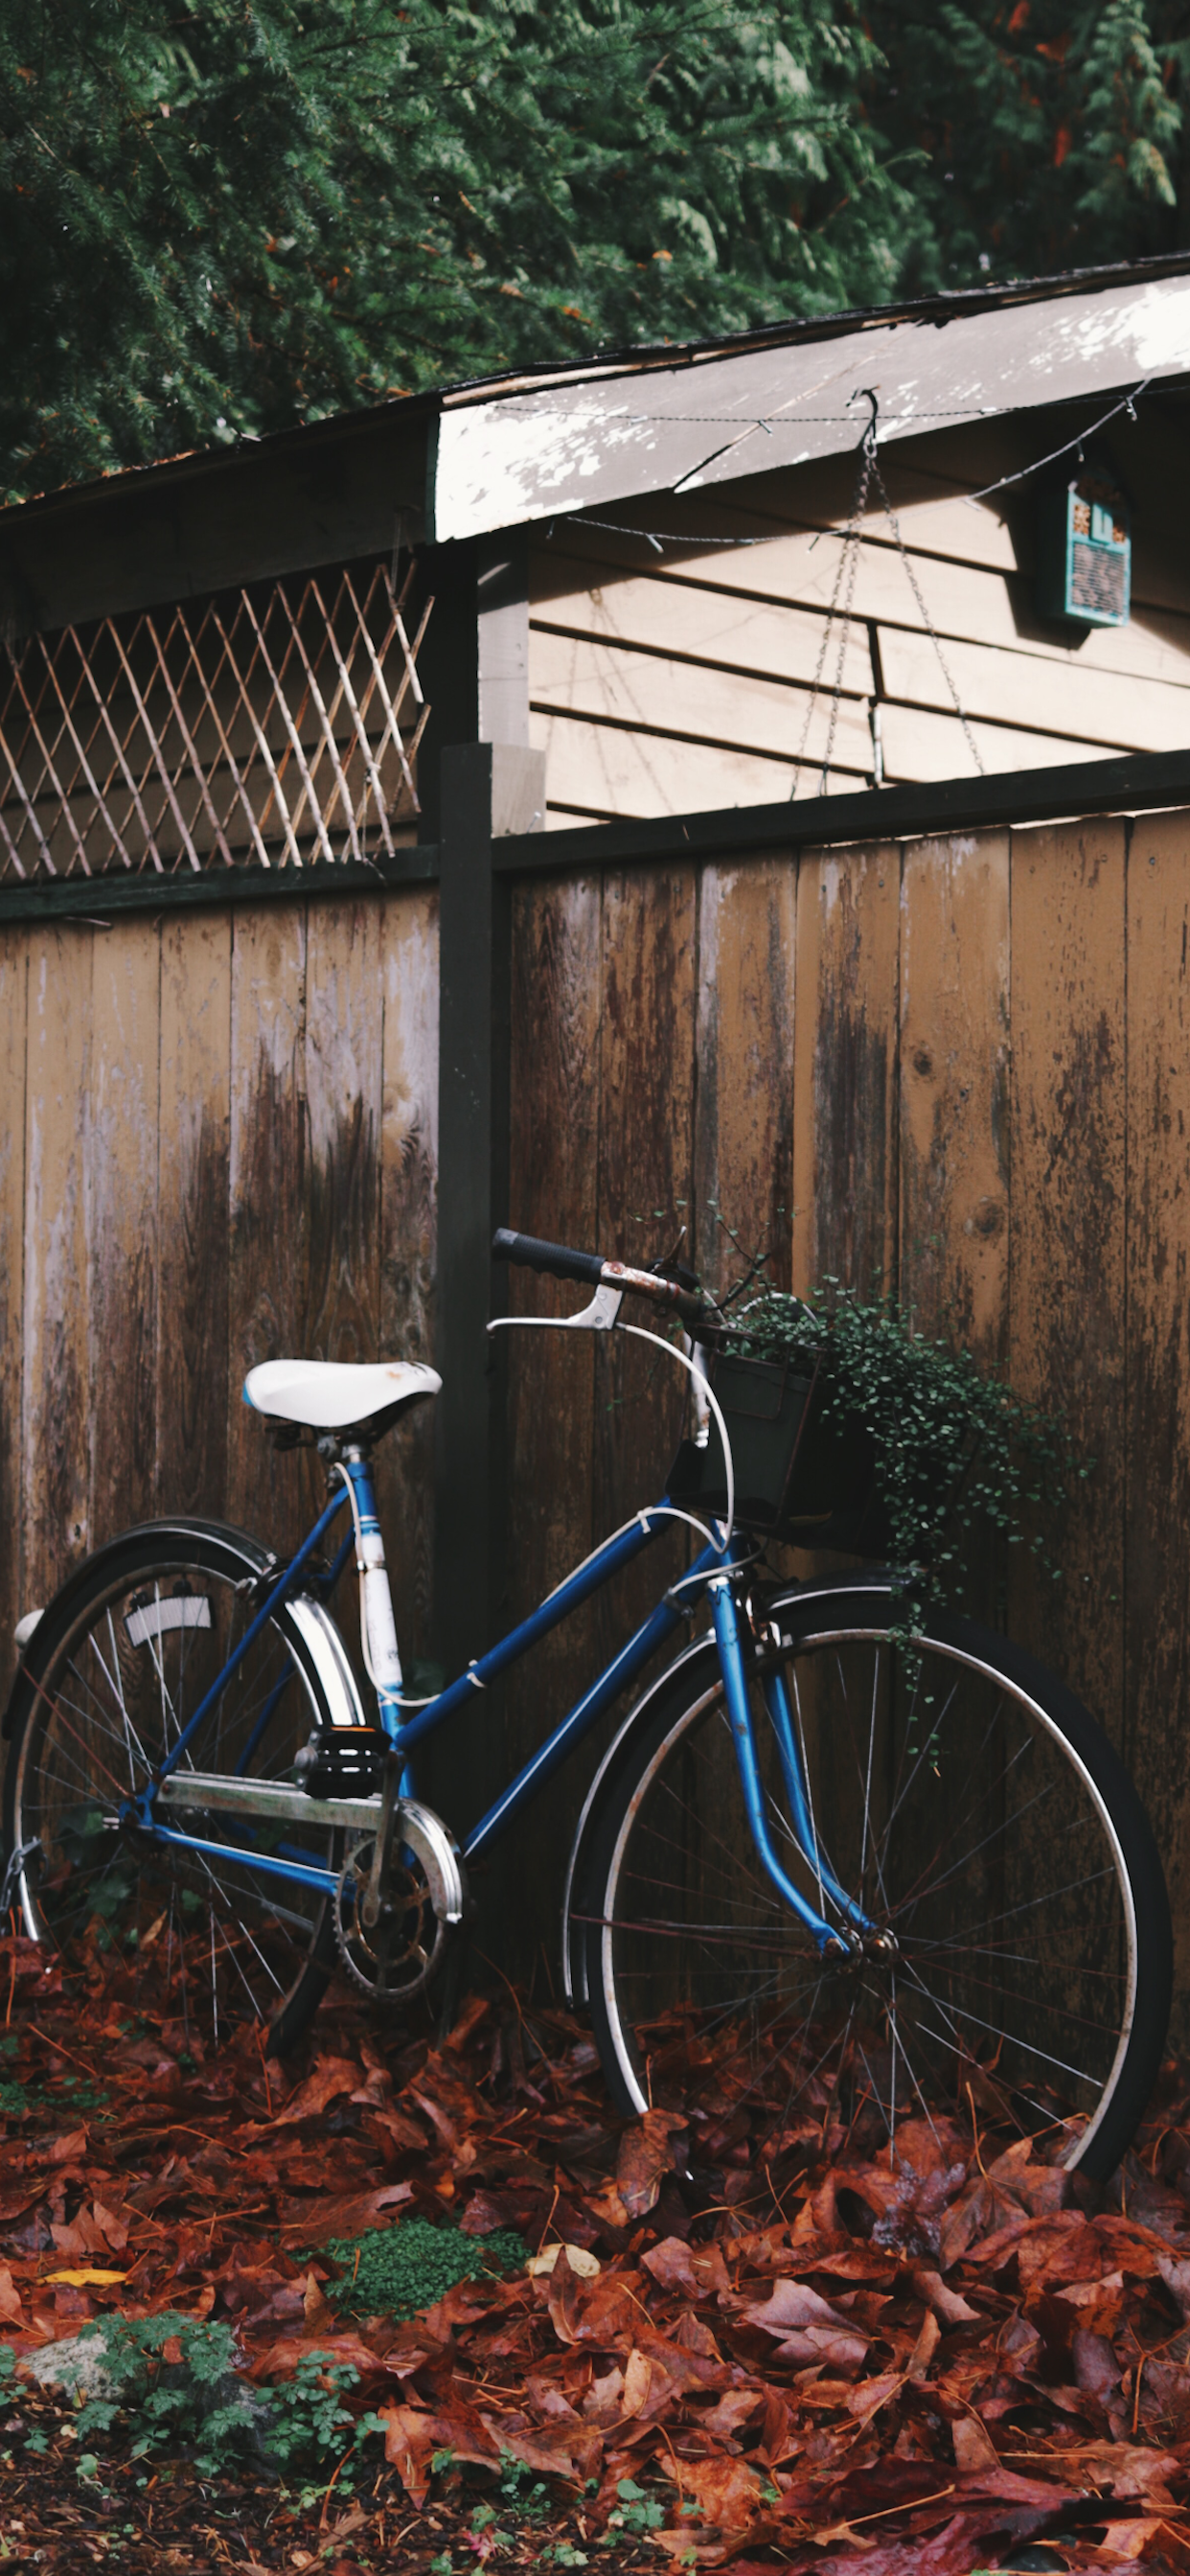 Bicycle Wallpaper for iPhone Pro Max, X, 6